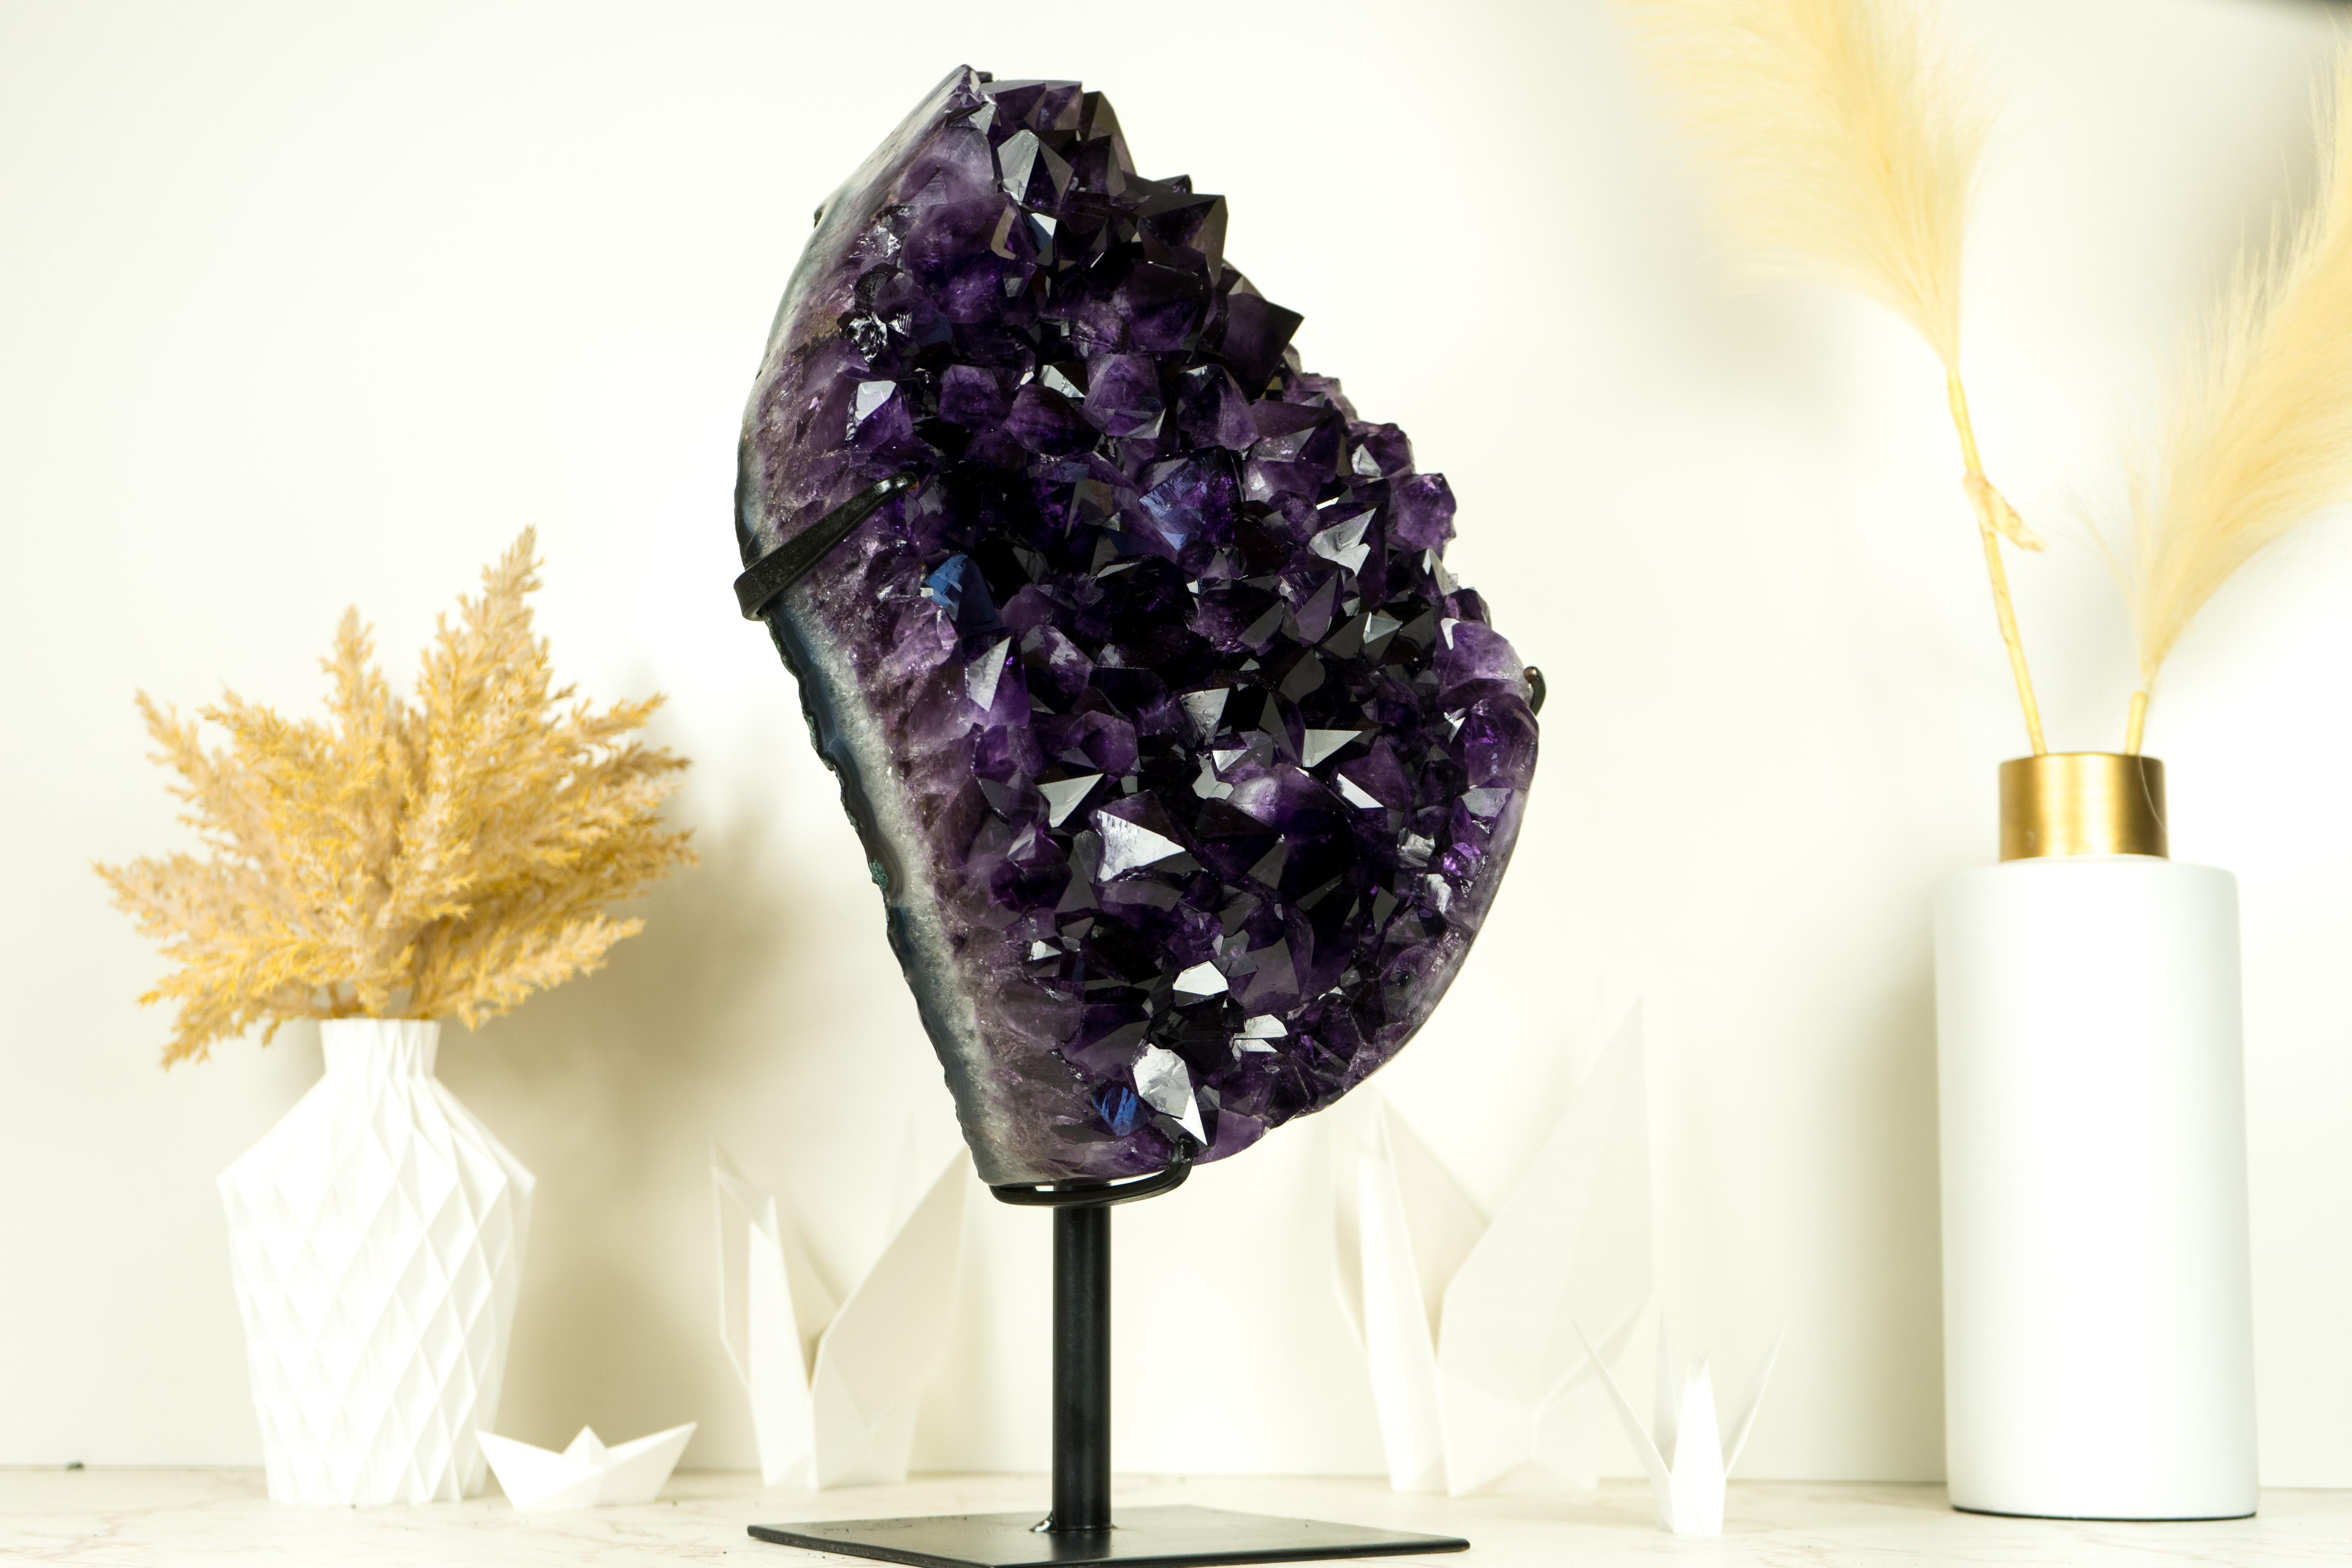 A phenomenal, Large AAA Amethyst Geode Cluster that surely will leave you in awe, this natural Amethyst brings world-class characteristics in an X-Large natural formation that will make it a phenomenal addition to any crystal collection or